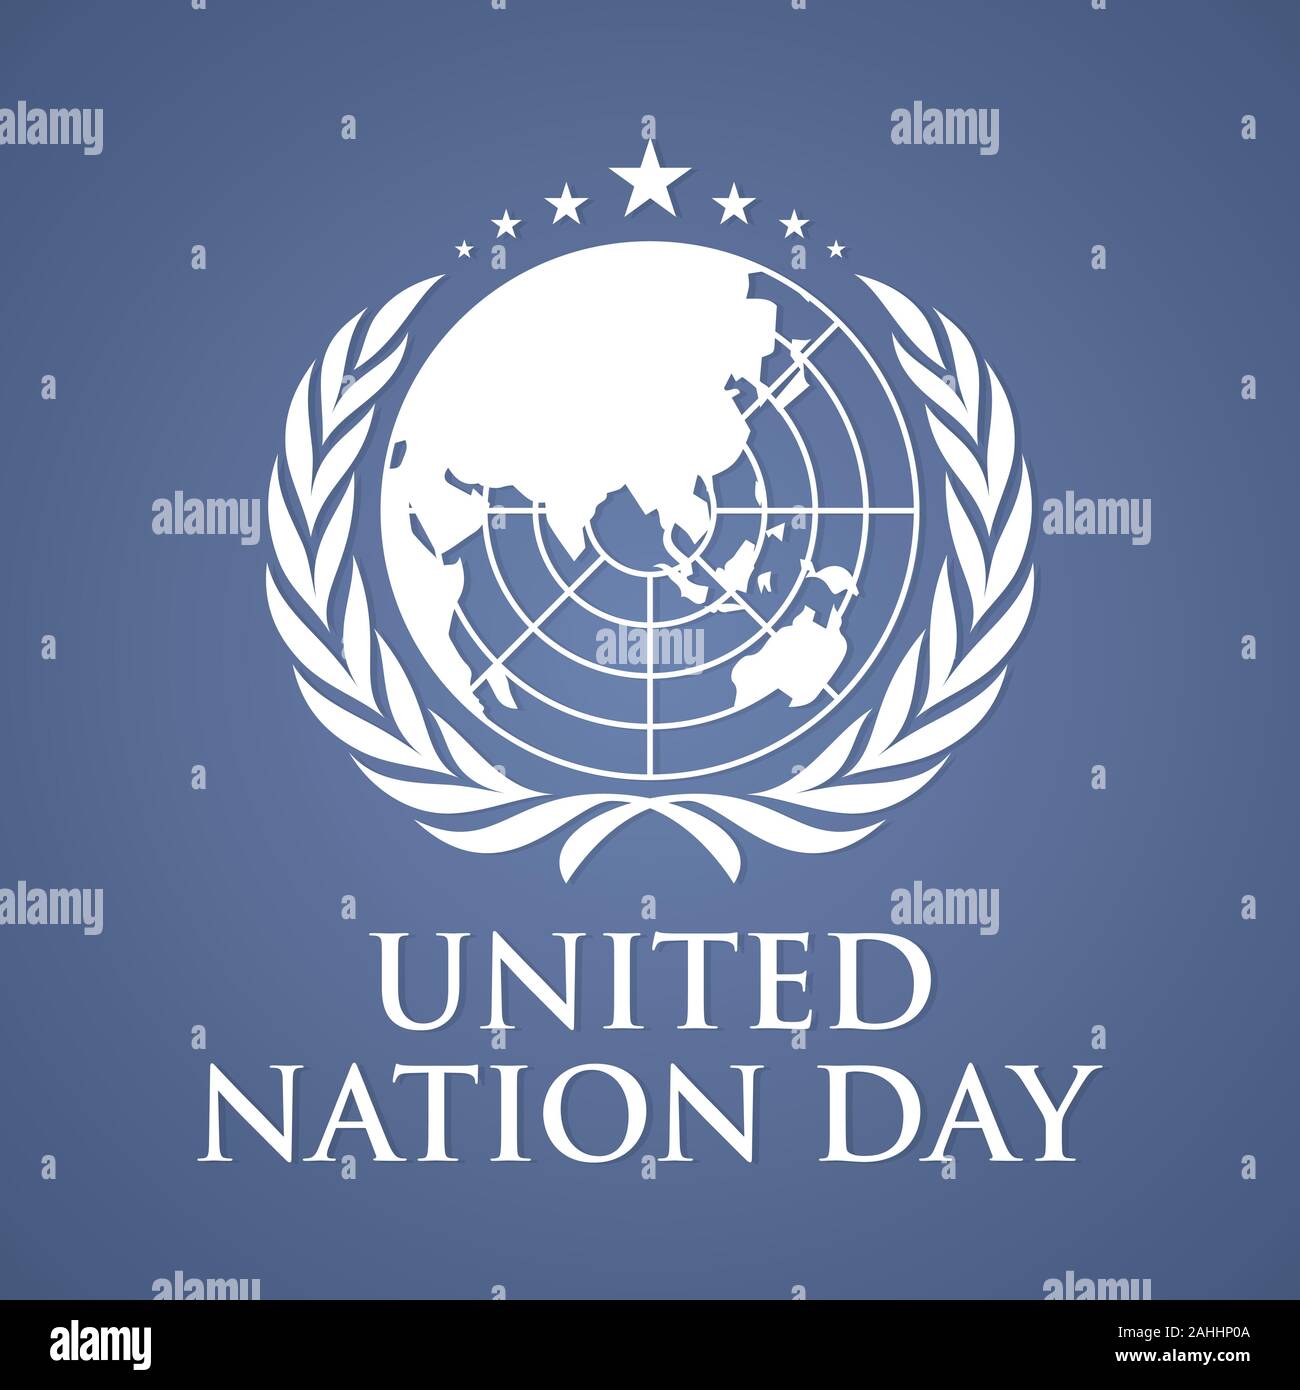 United nation day letter vector background. United nation day text banner. Vector illustration EPS.8 EPS.10 Stock Vector